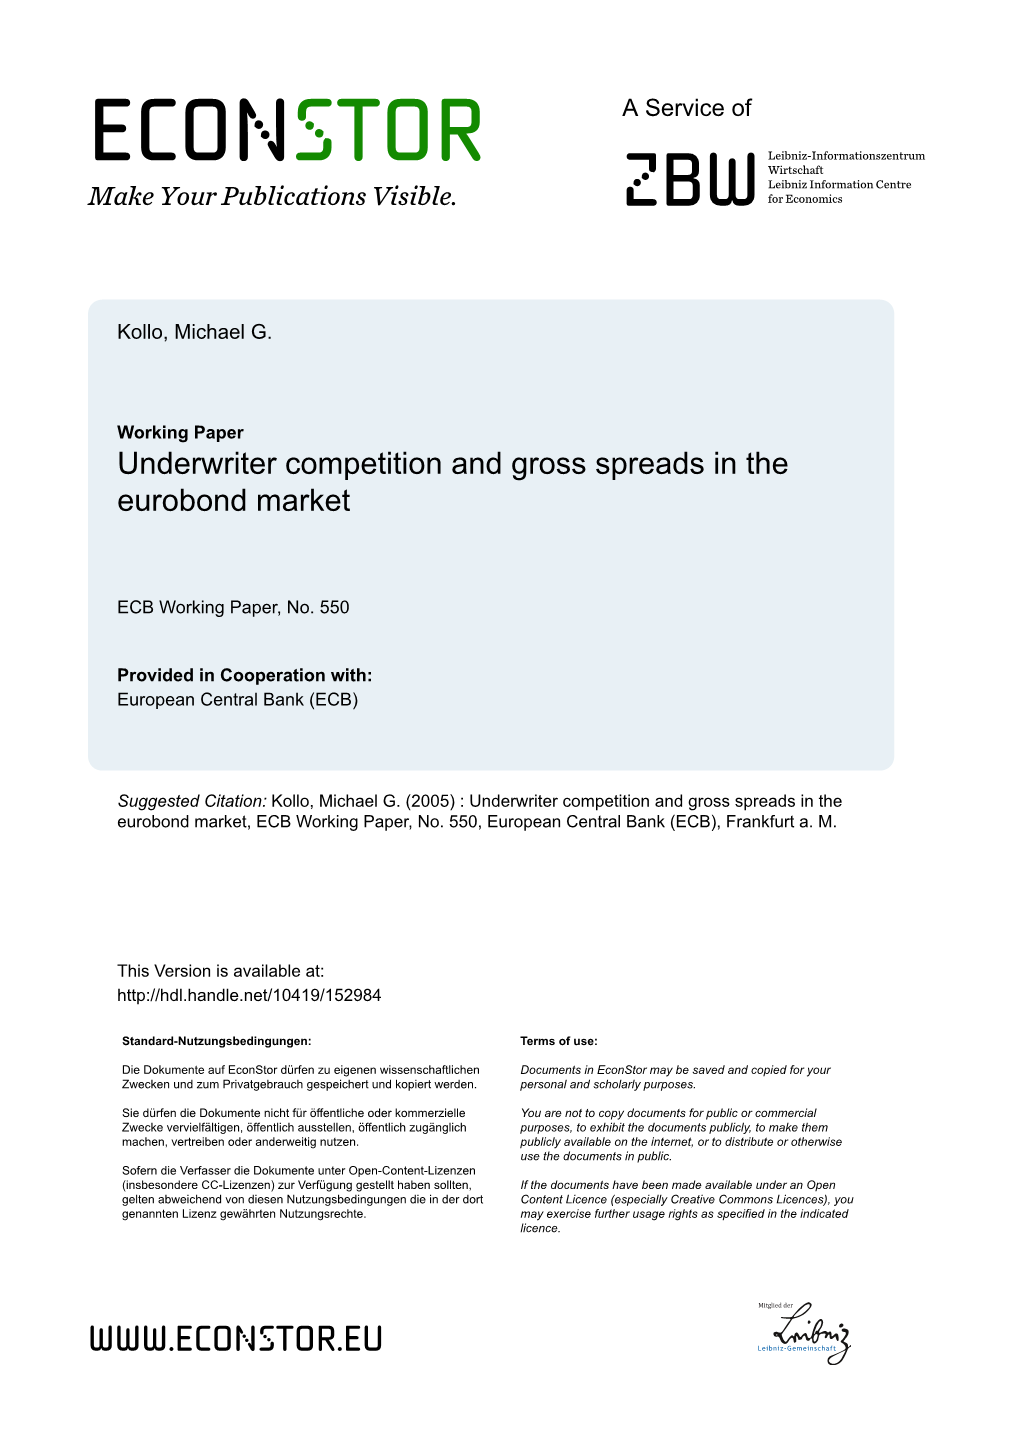 Underwriter Competition and Gross Spreads in the Eurobond Market